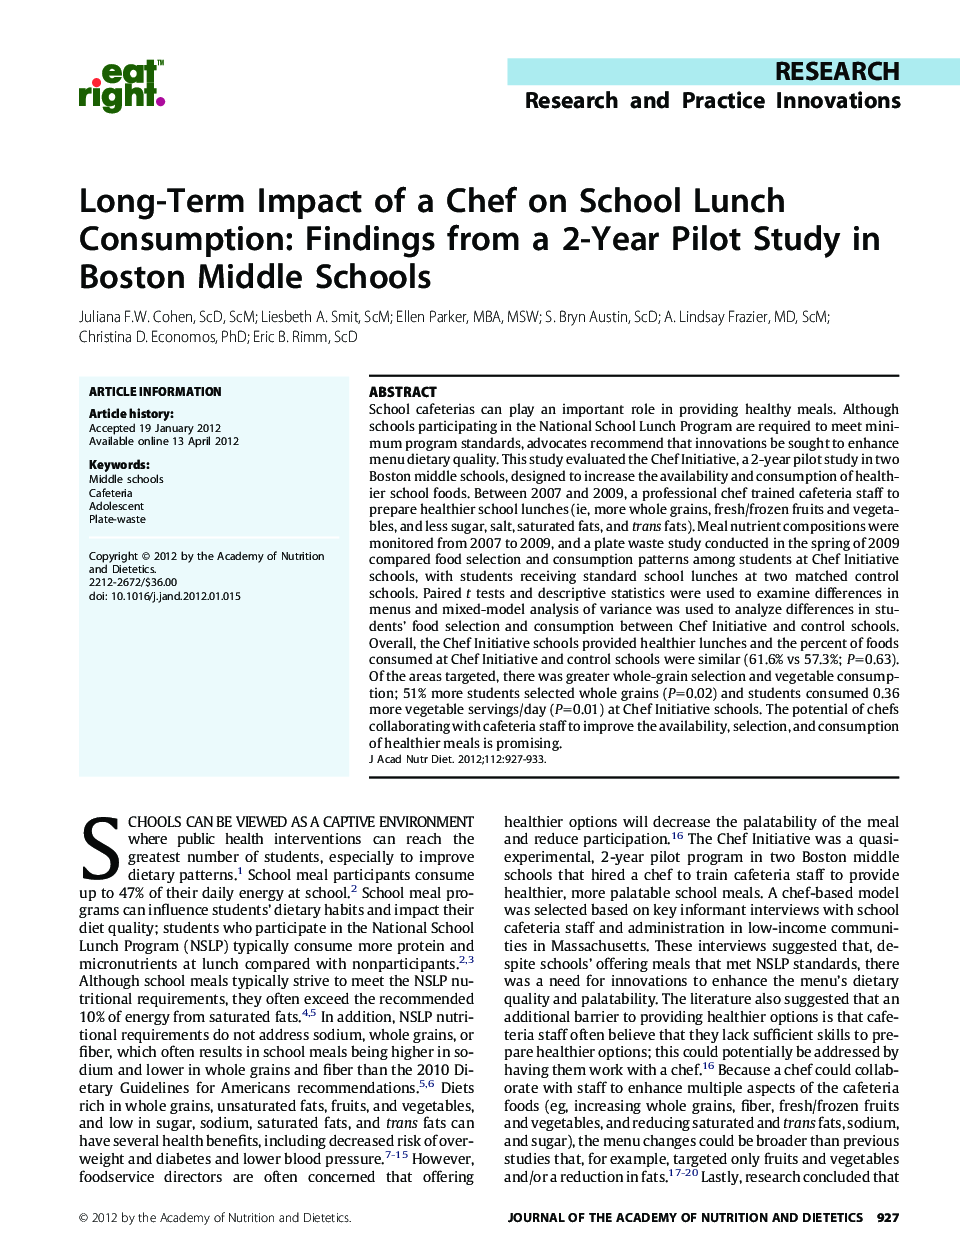 Long-Term Impact of a Chef on School Lunch Consumption: Findings from a 2-Year Pilot Study in Boston Middle Schools 